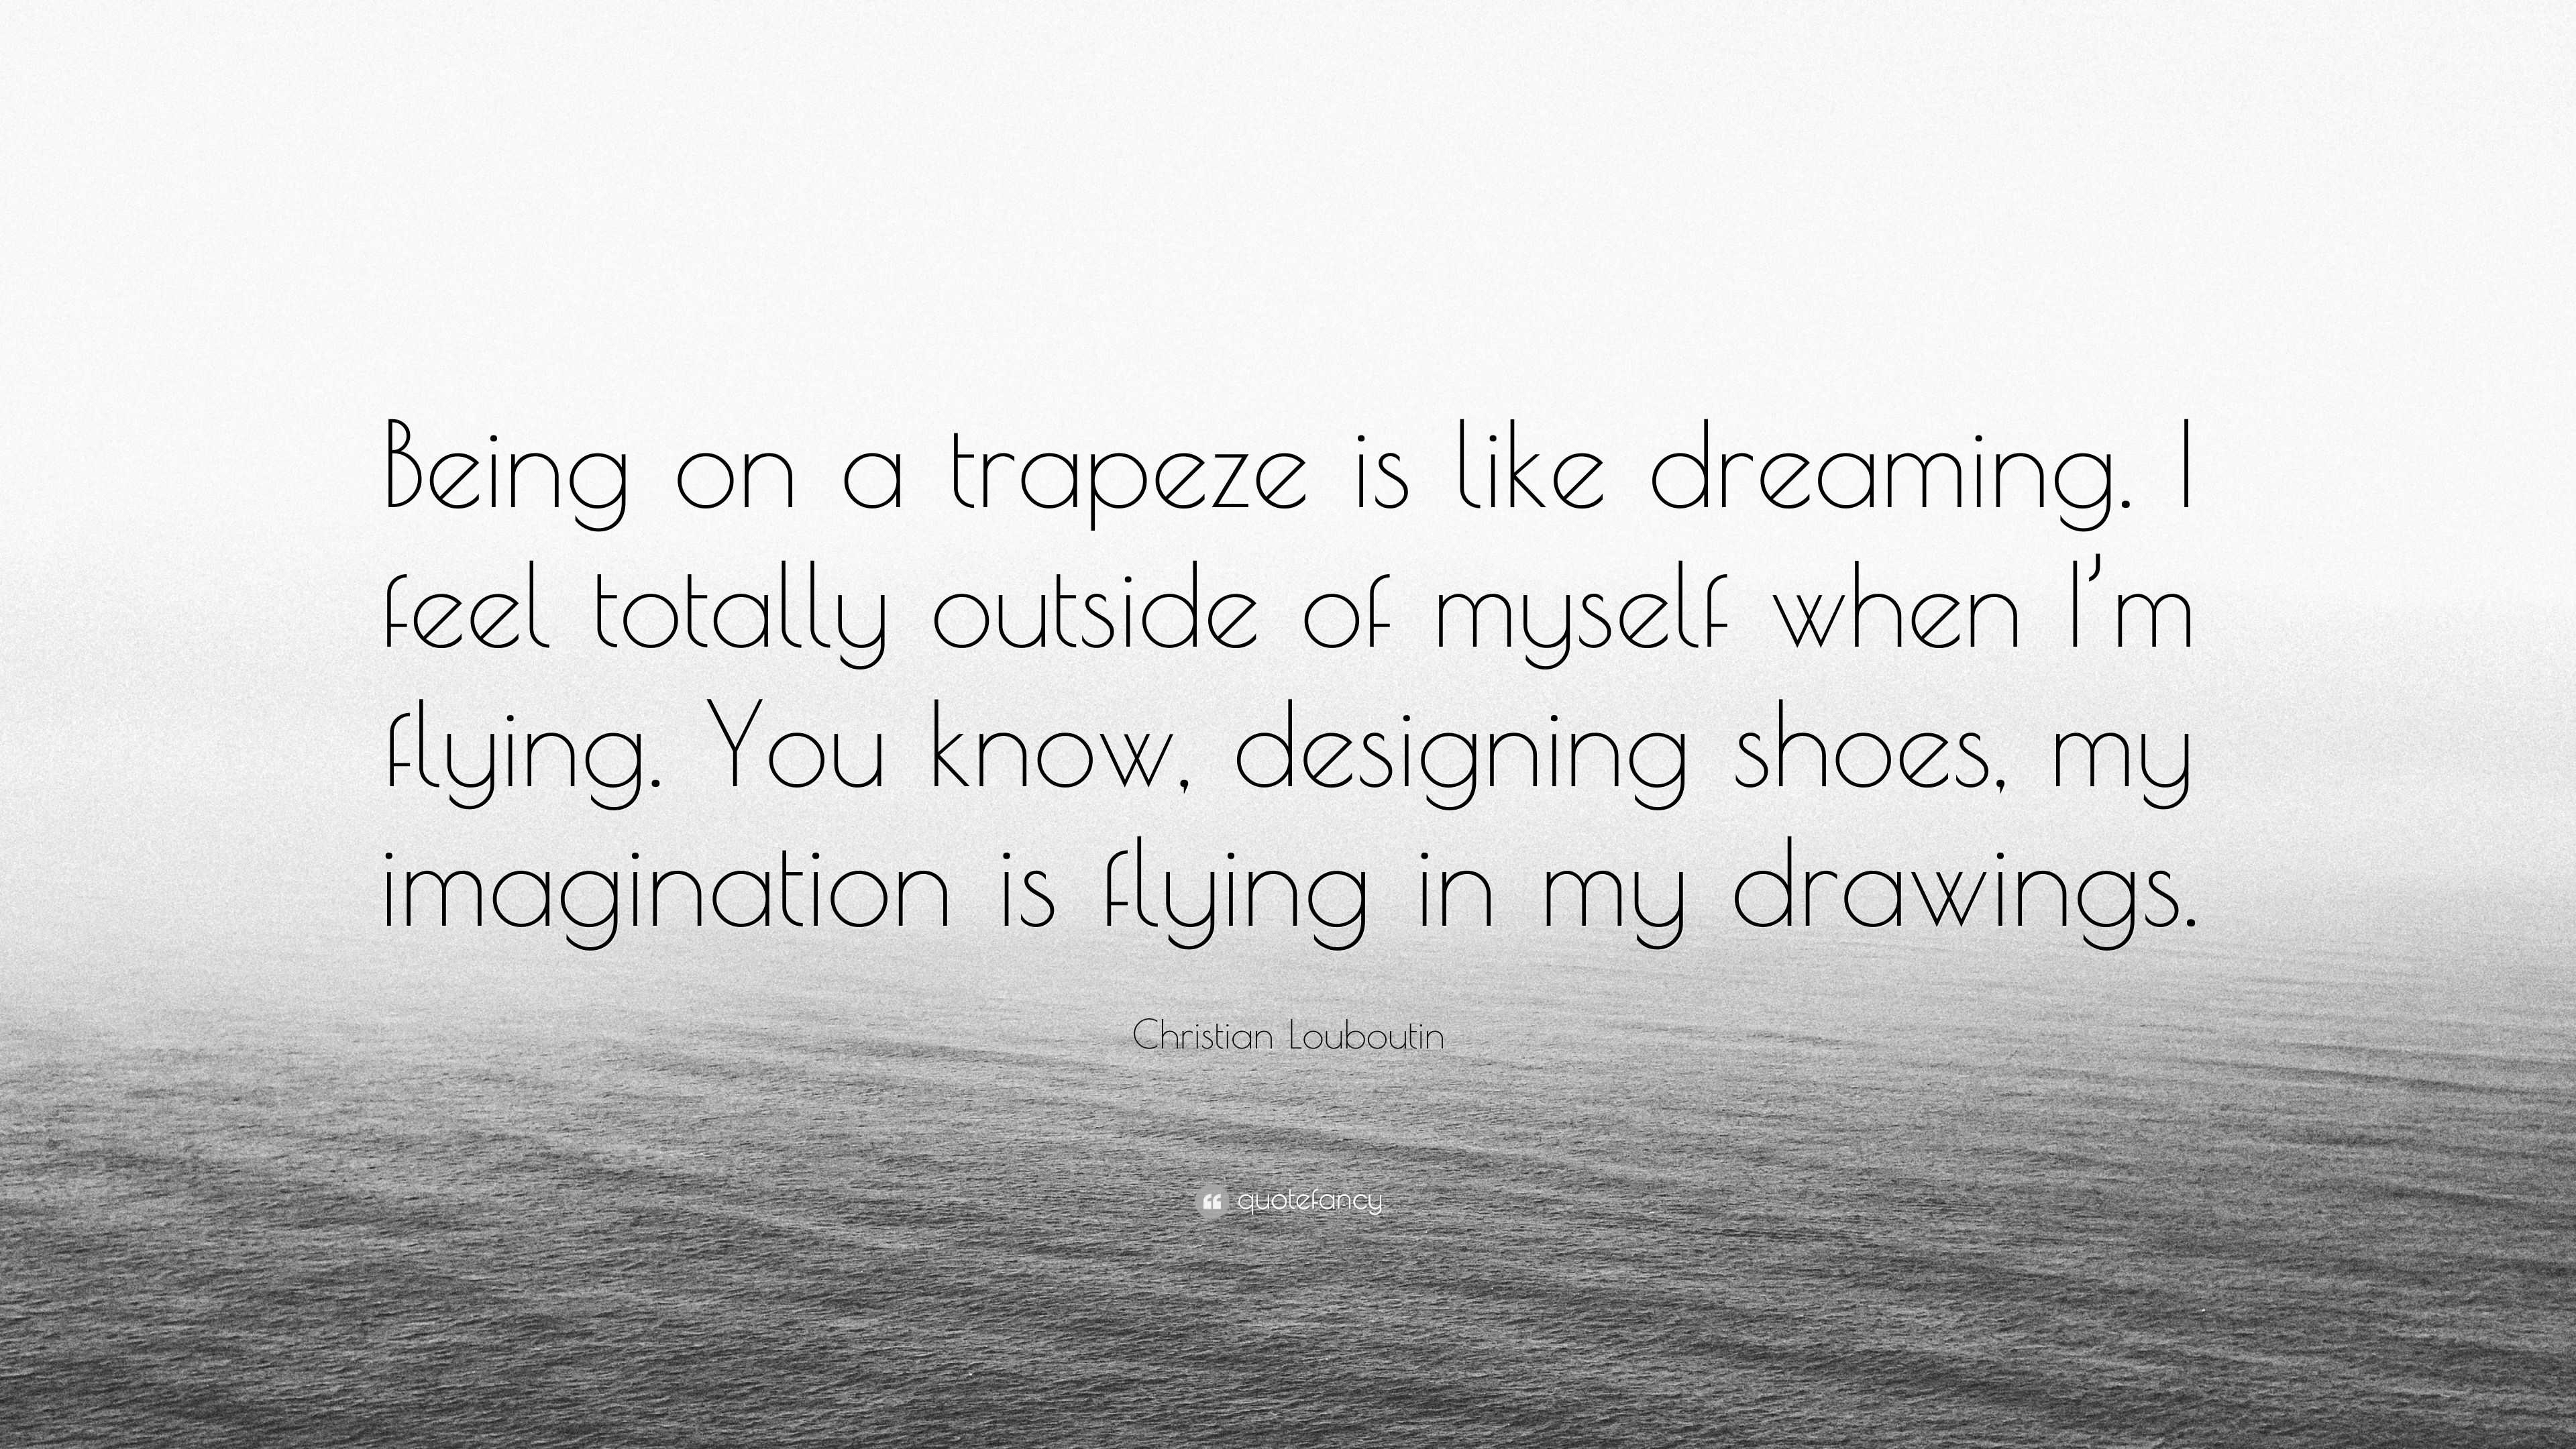 Christian Louboutin Quote: “My business partner gave me a drone, a